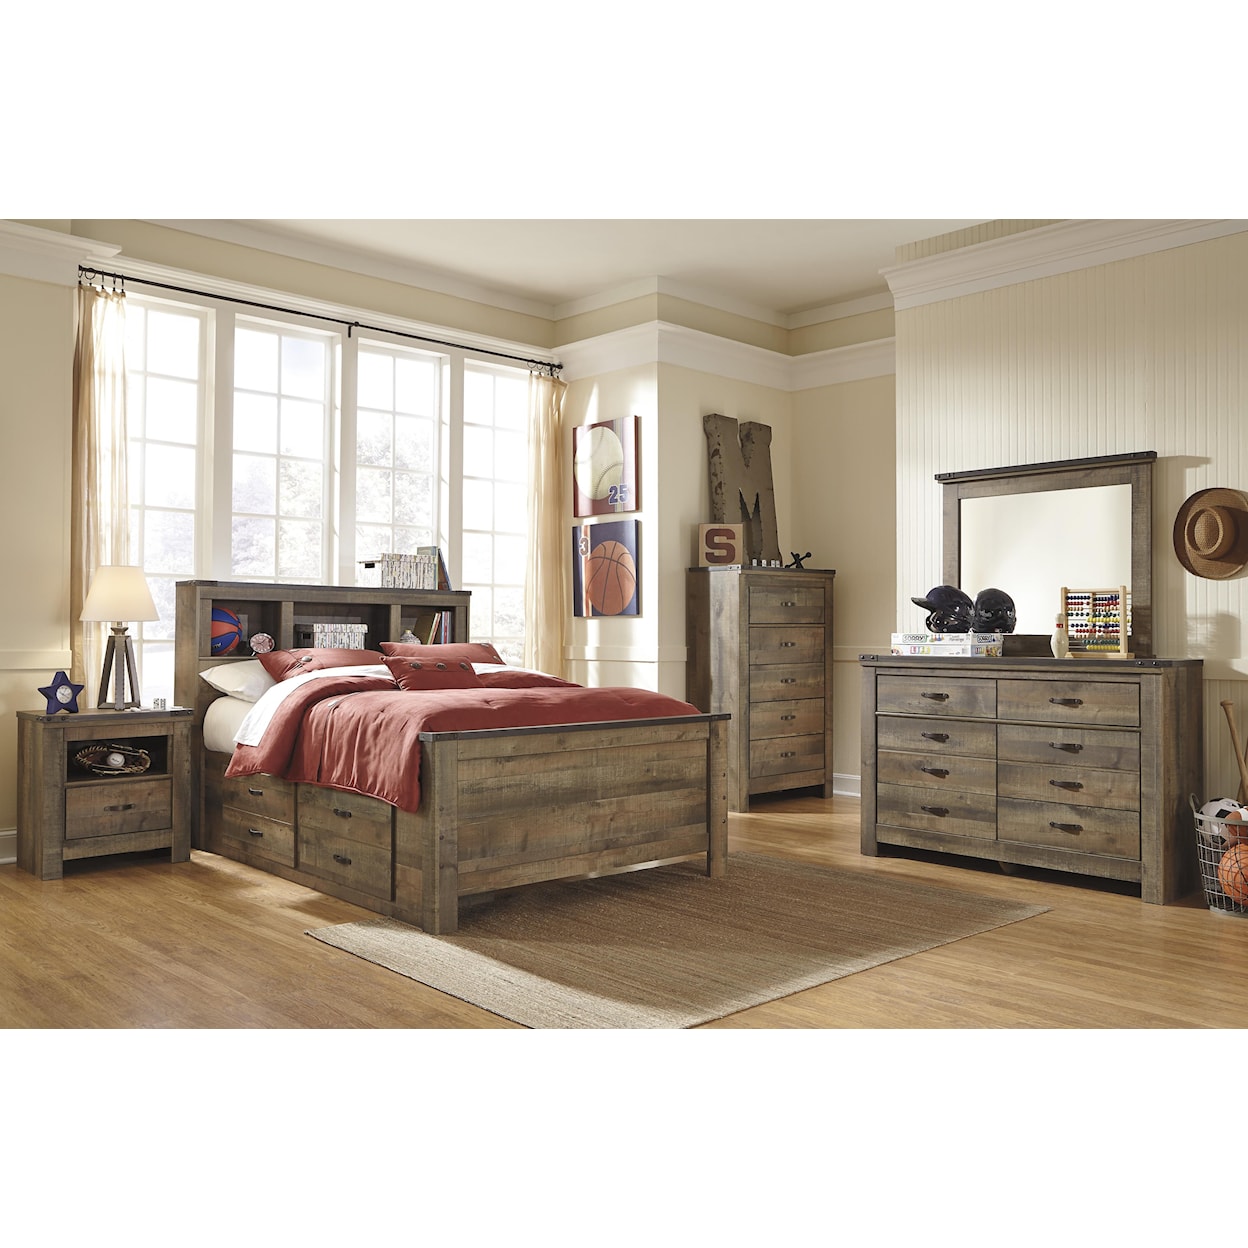 Ashley Furniture Signature Design Trinell Full Bookcase Bed with Under Bed Storage